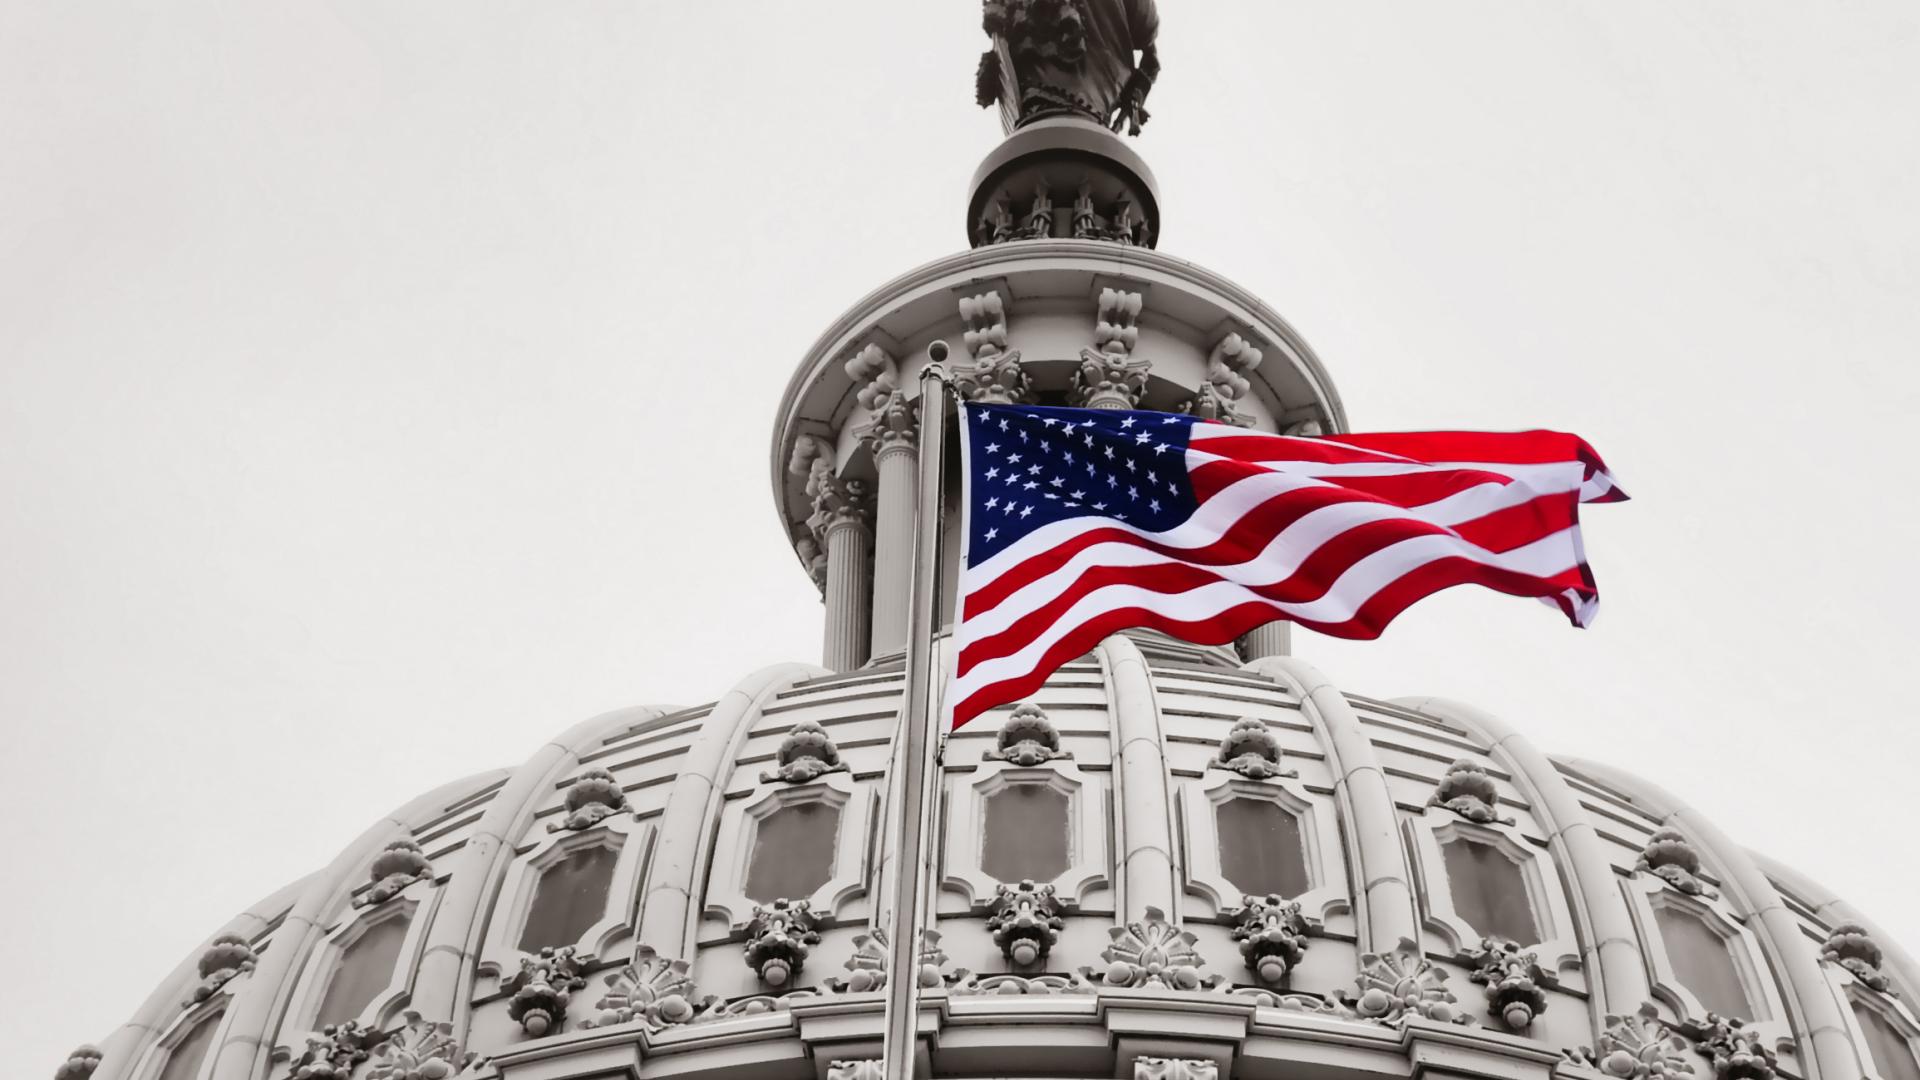 Image of the US Capitol dome with a US flag in the foreground